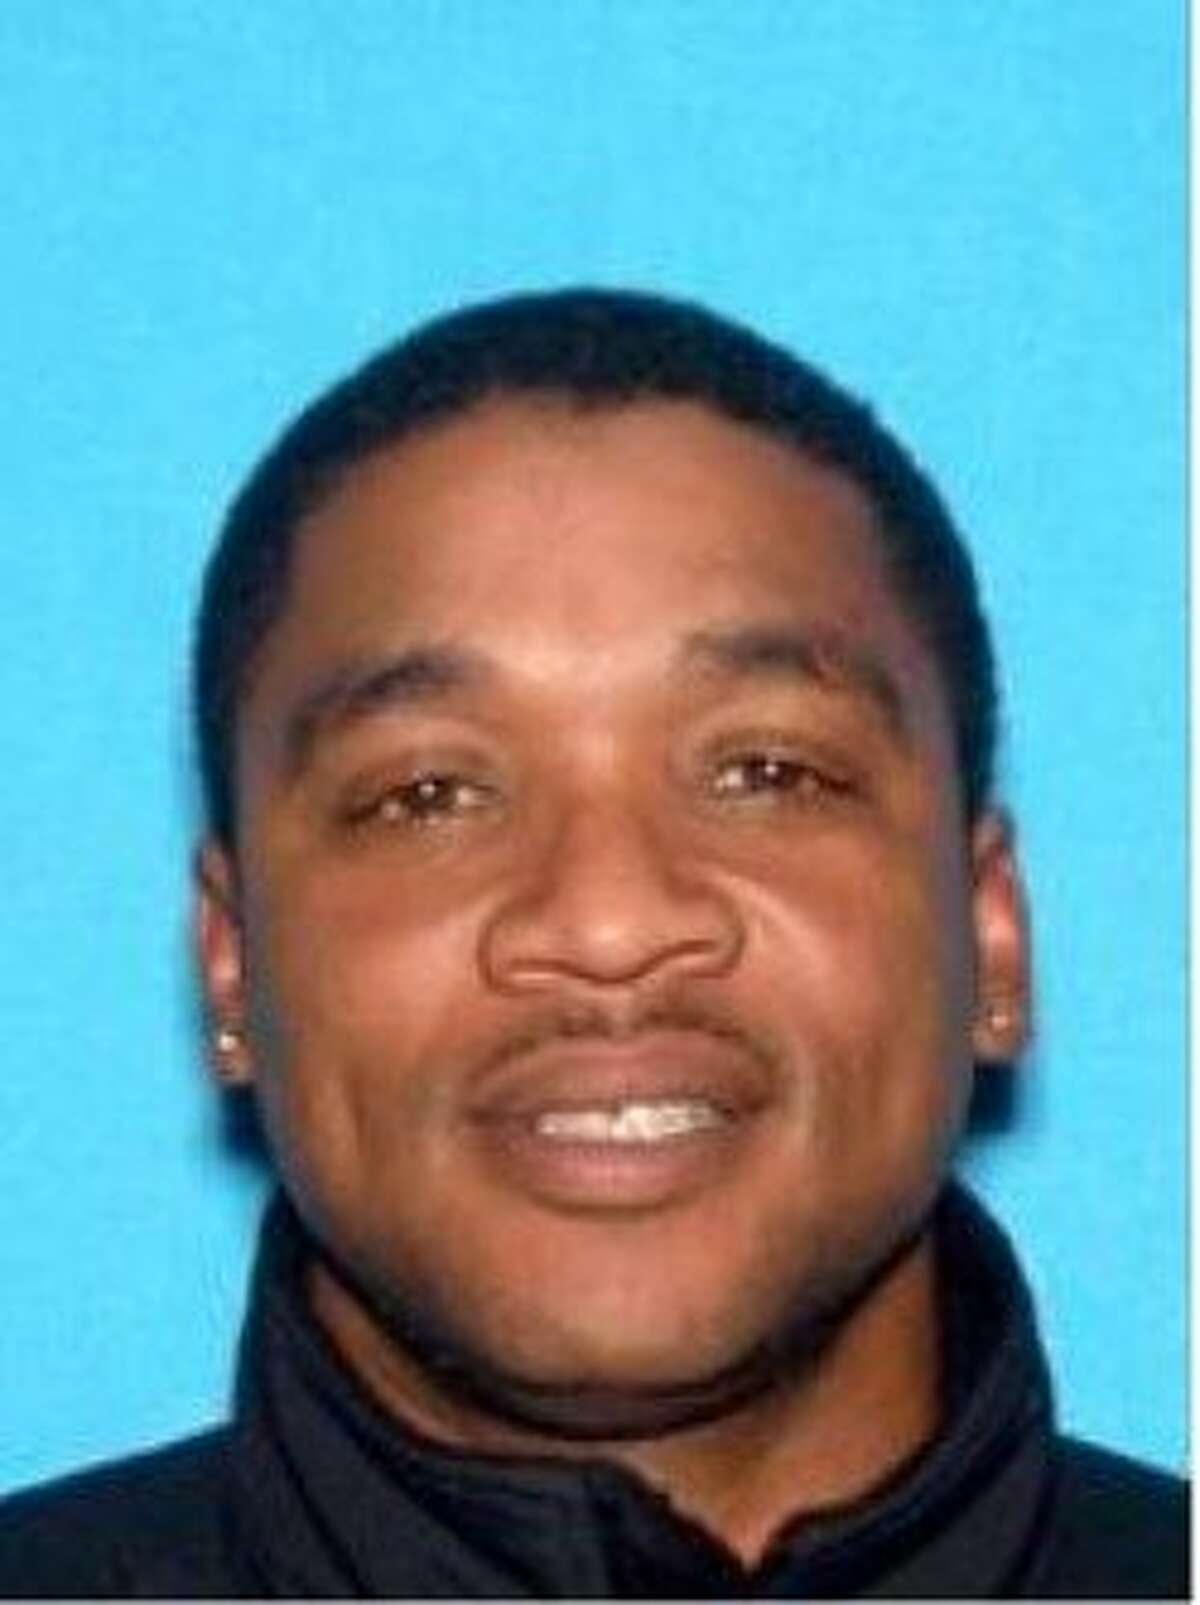 San Francisco and Oakland police are looking 43-year-old Stefon Jefferson, a suspect two separate shootings Friday.